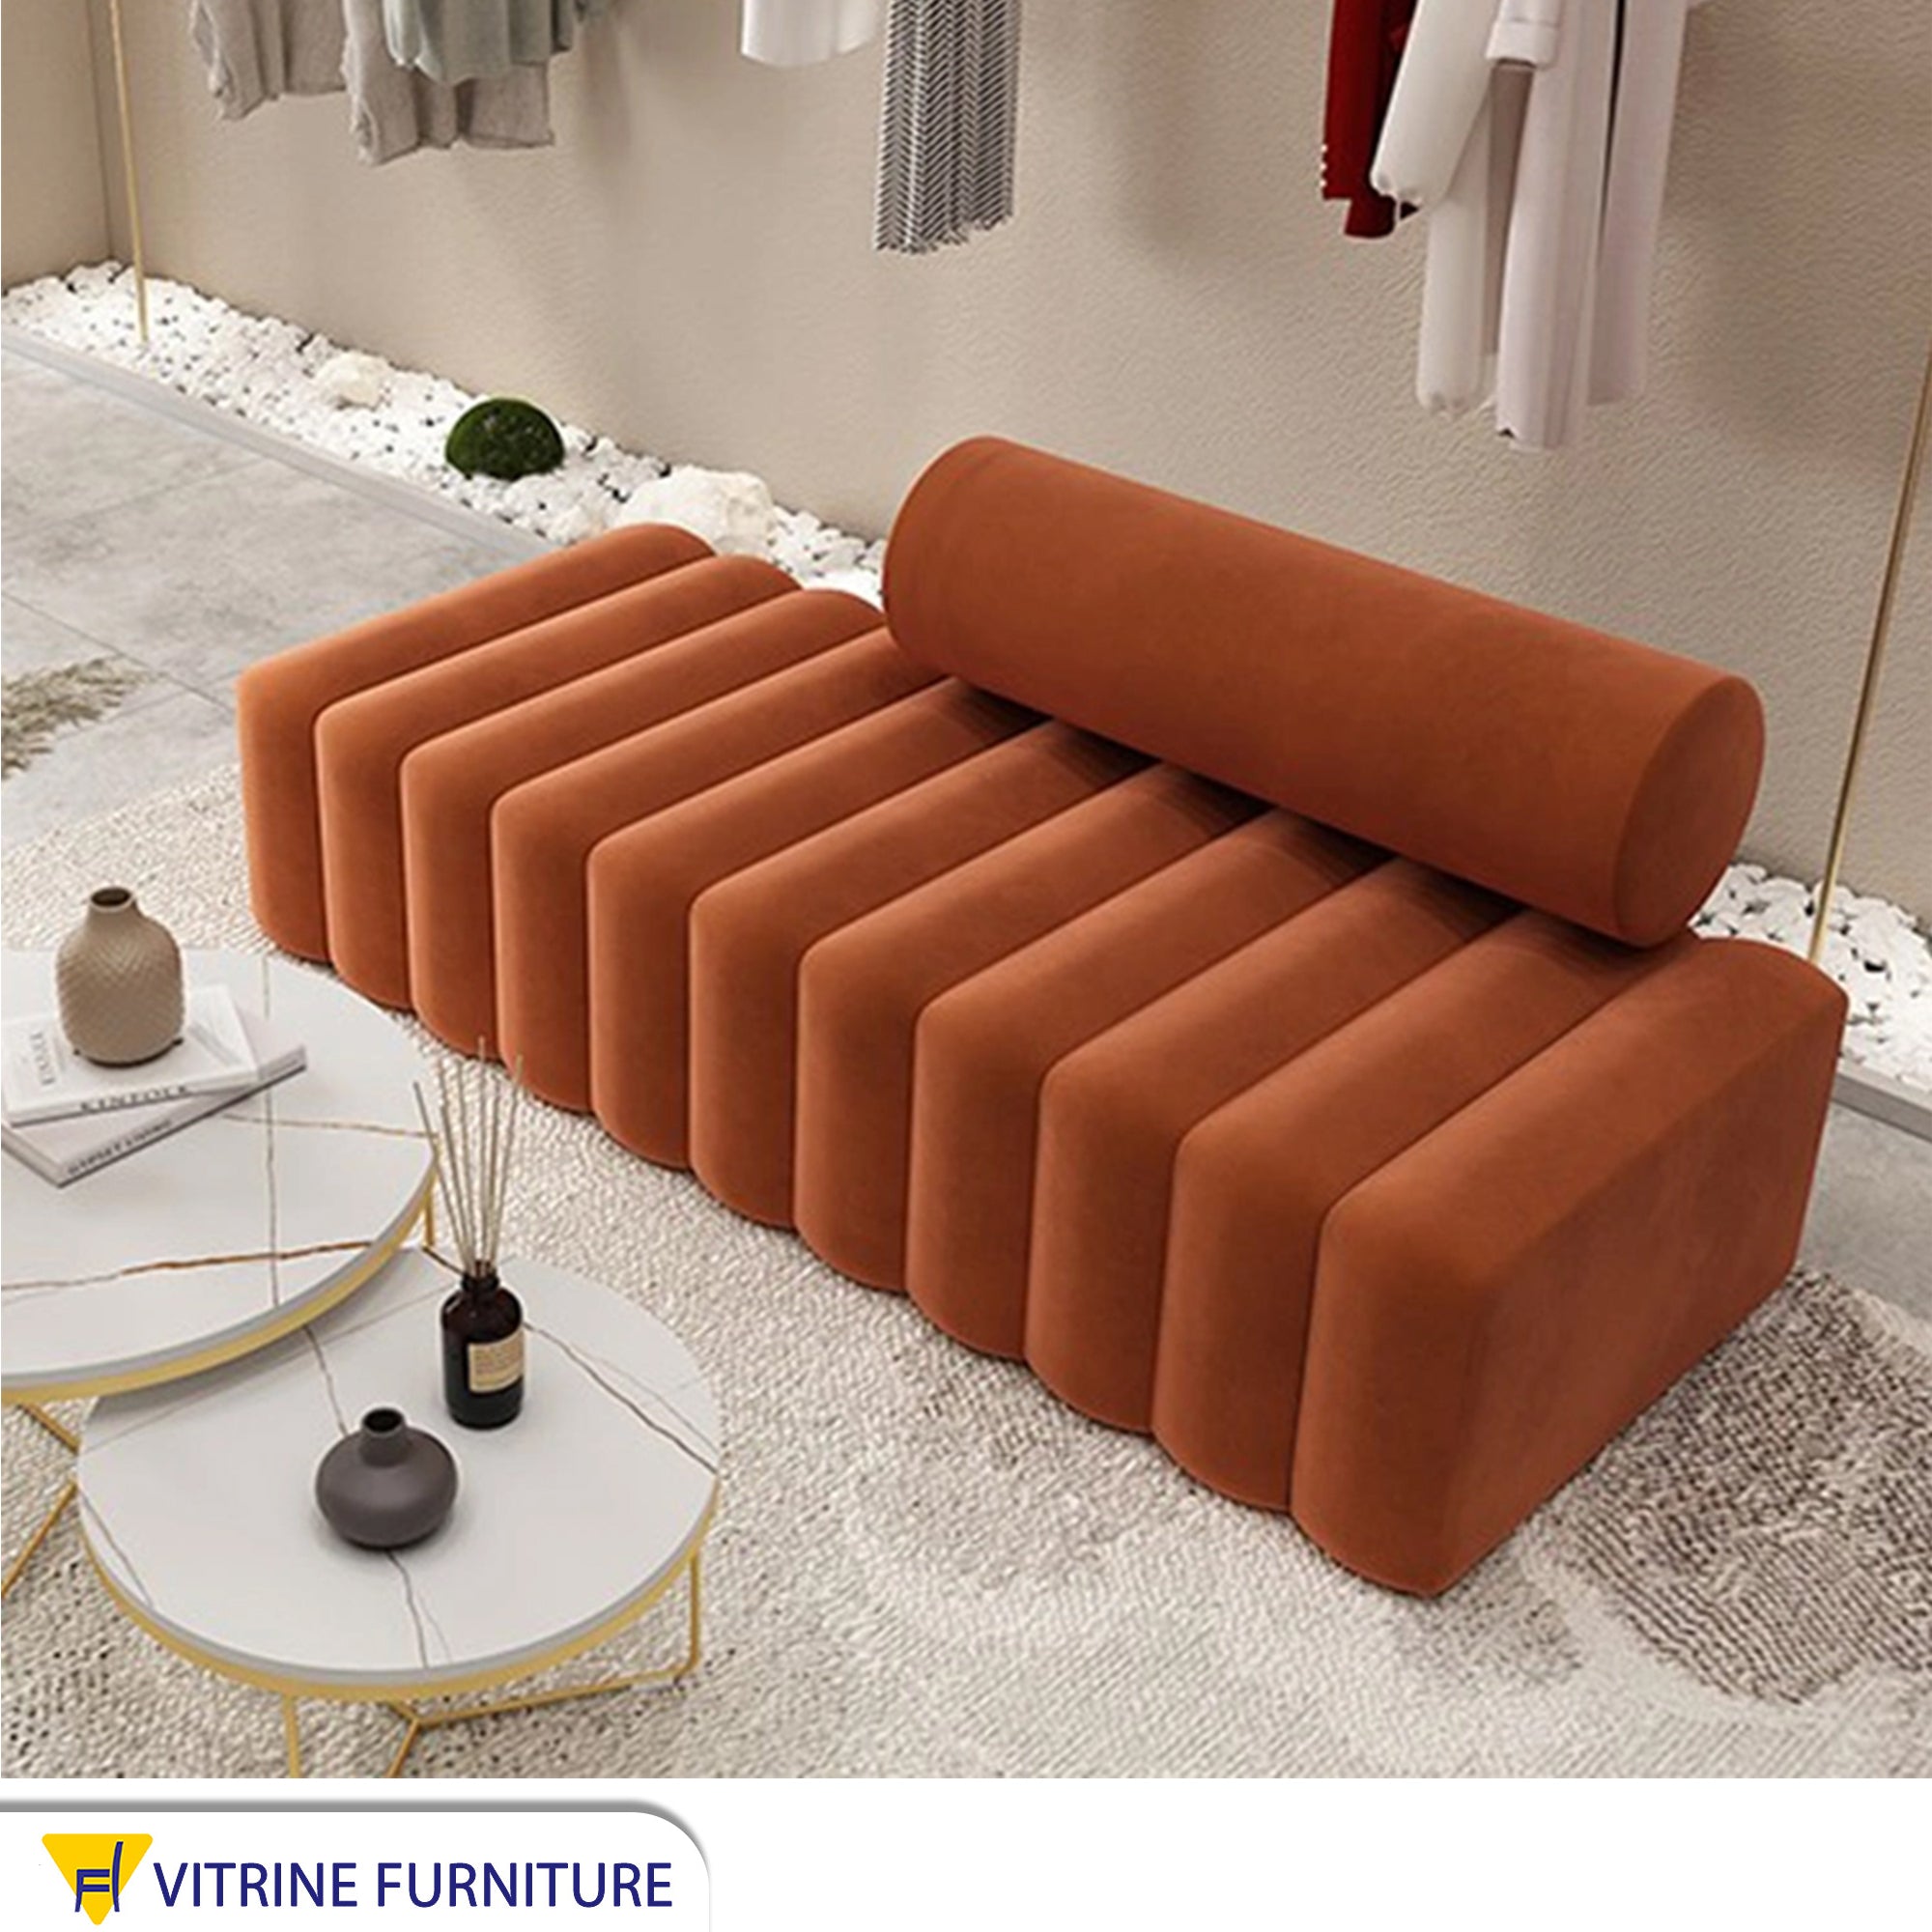 Chaise longue sofa with ribbed upholstery